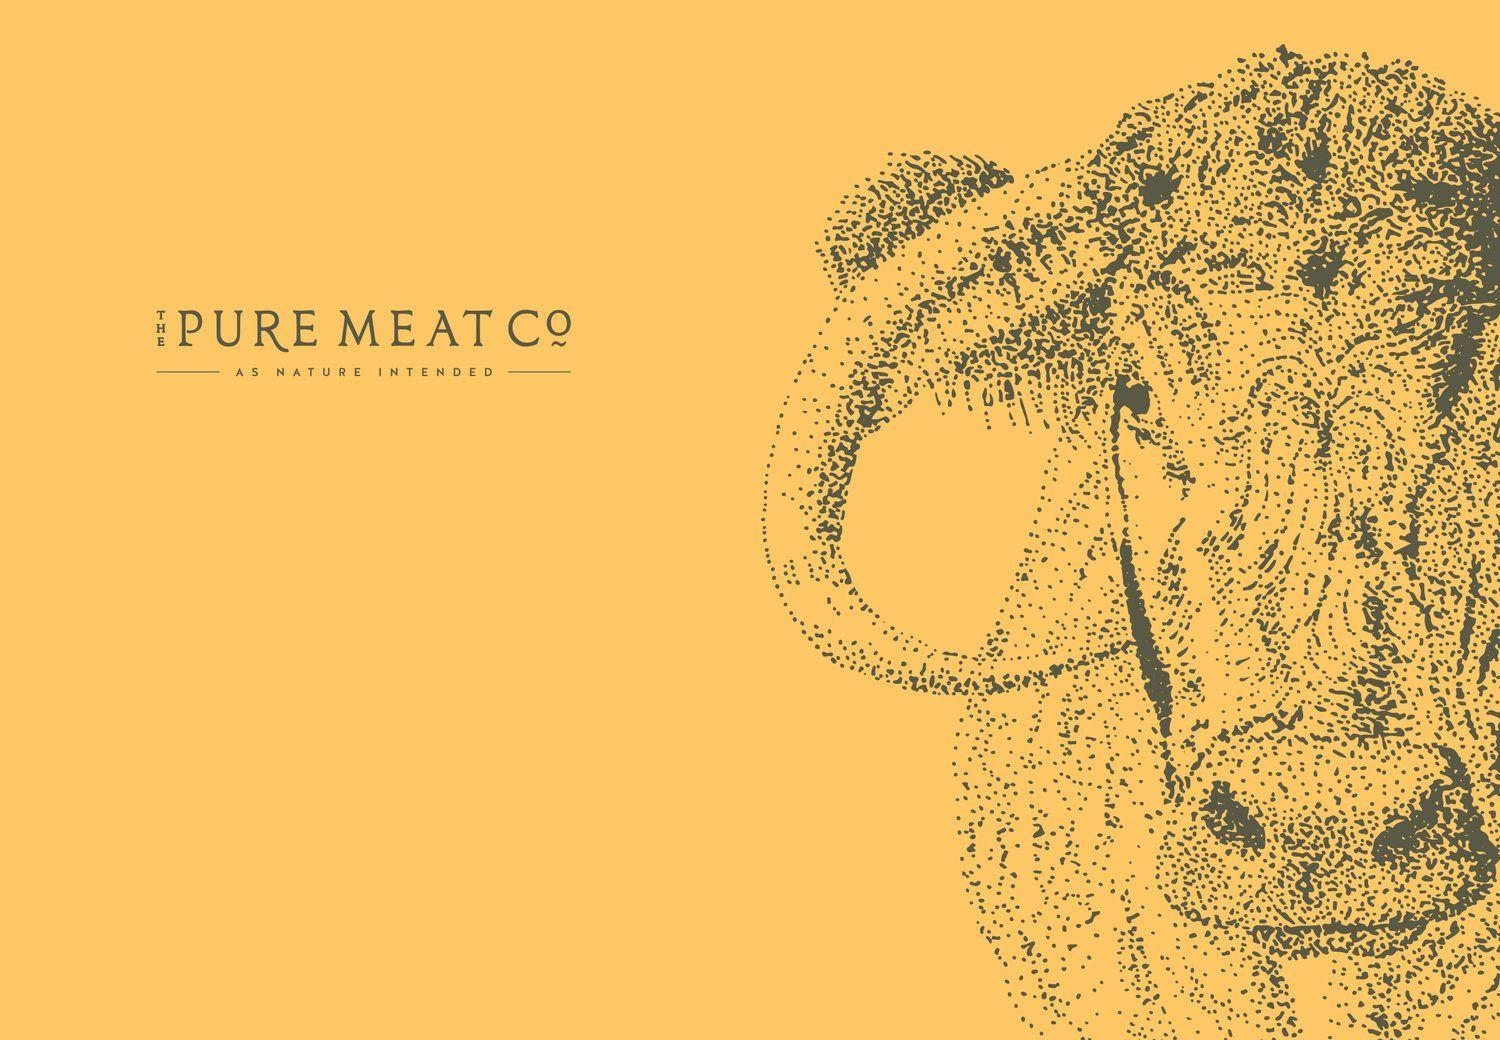 Small Meat Logo - Proud to Present: a brilliantly energetic brand for The Pure Meat ...